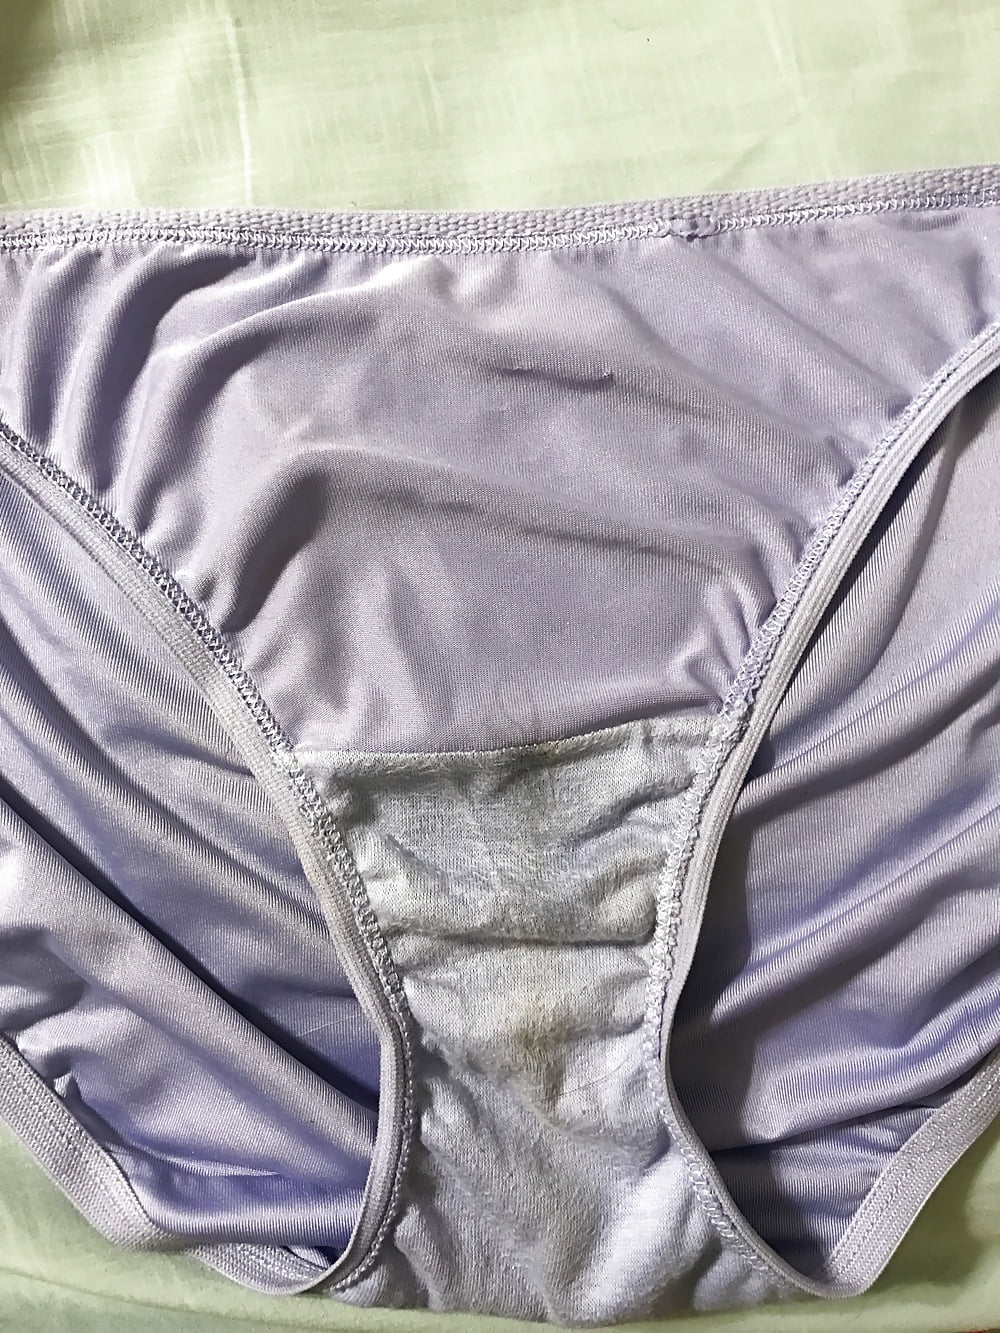 Wife's dirty, smelly panties porn gallery